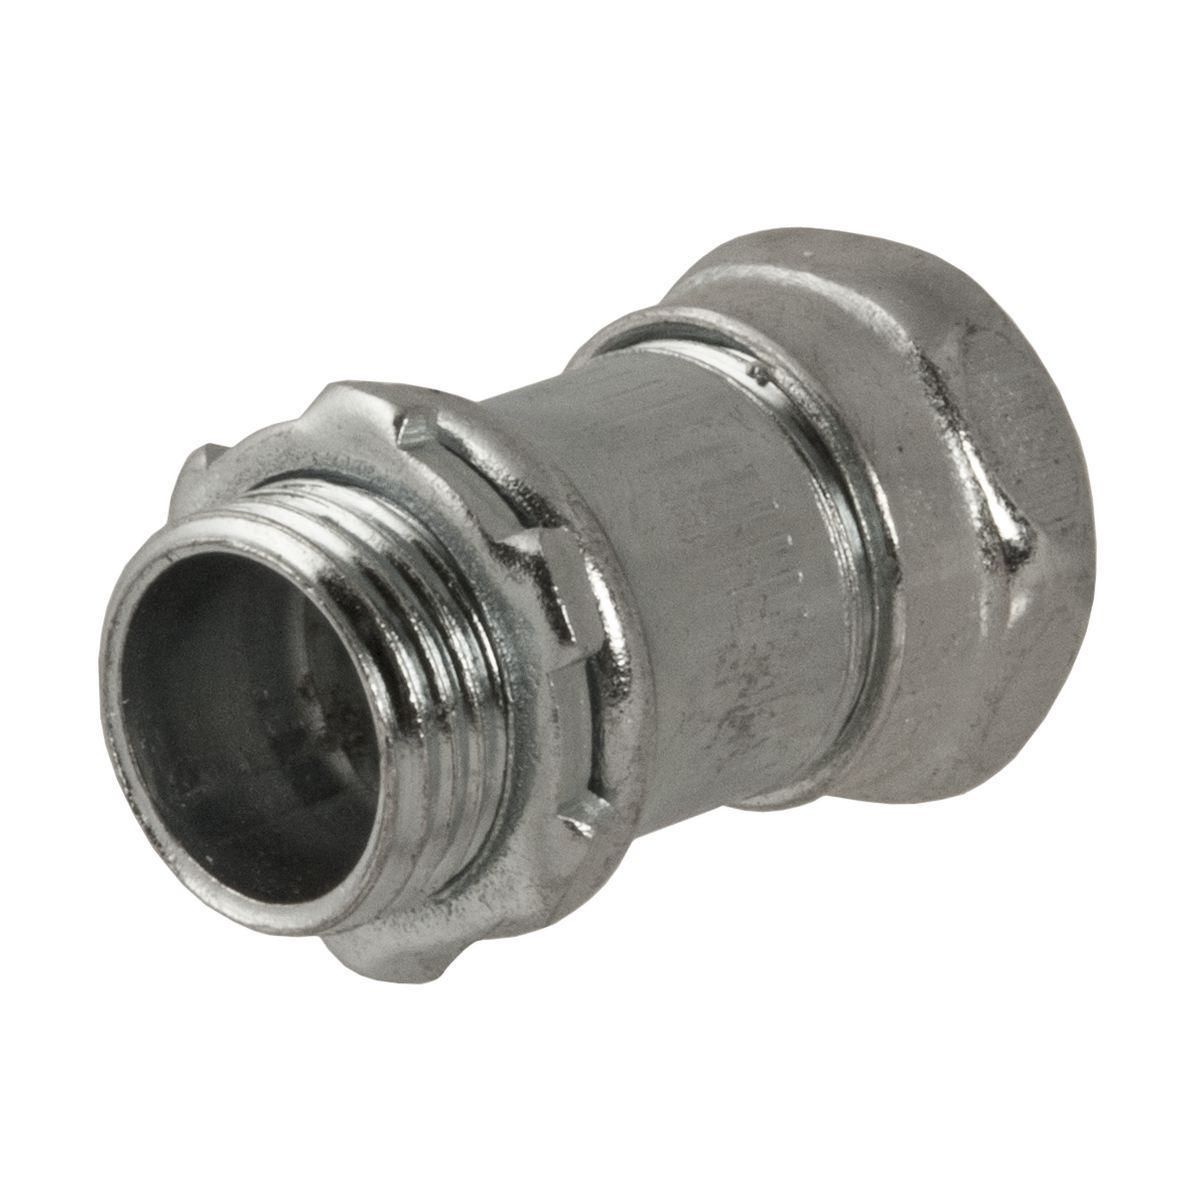 Uninsulated 1 in EMT Compression Connector